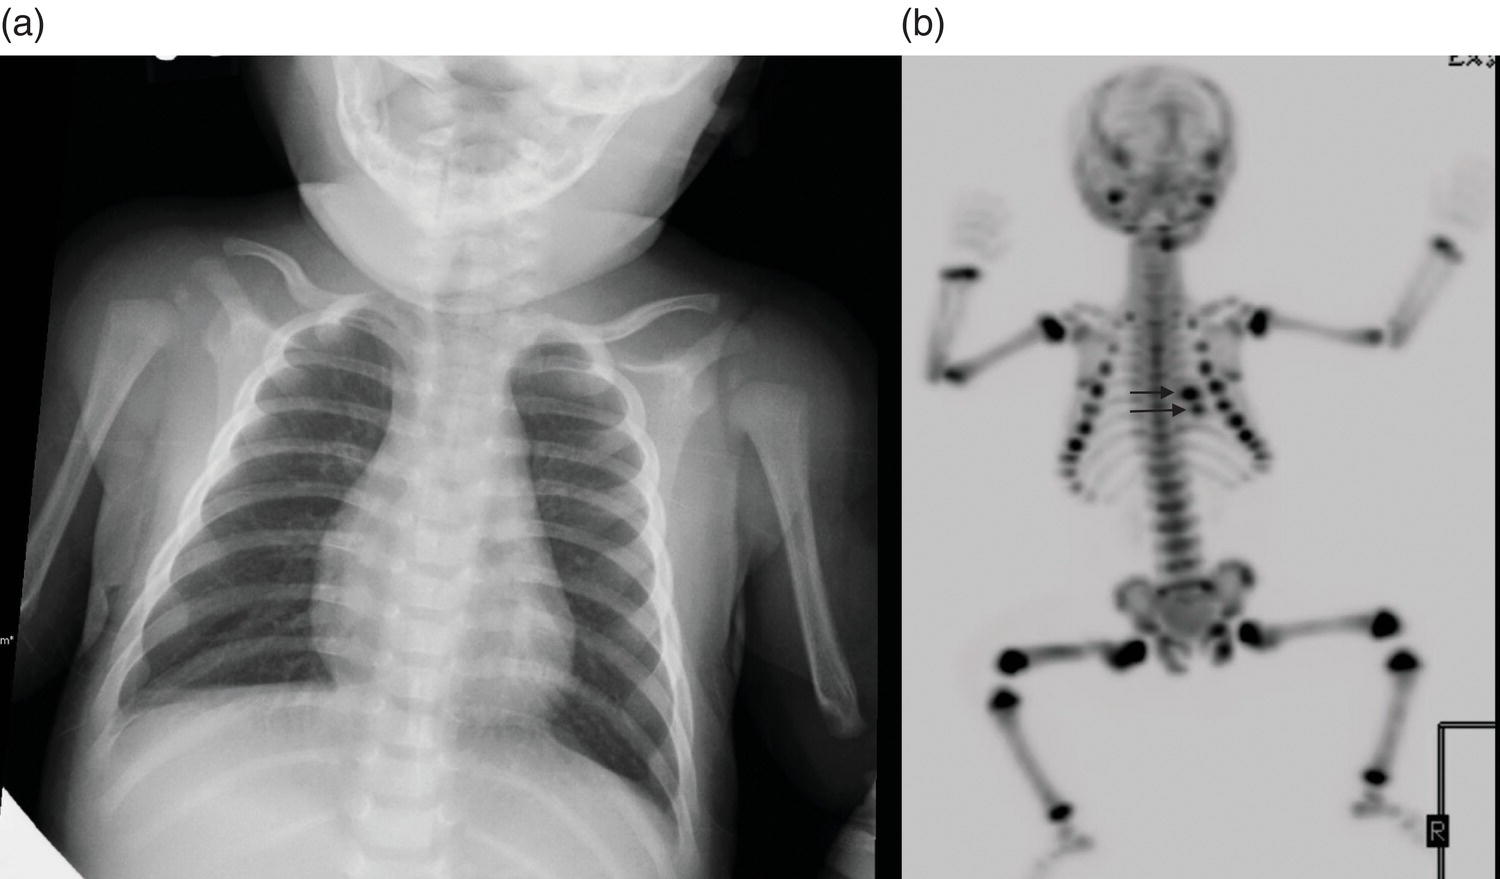 Schematic illustration of (a) 2-year-old male with suspected nonaccidental trauma. (b) 18F-NaF 3D Maximum intensity projection (MIP) bone scan showing focal intense radiotracer activity in the left posterior eighth and ninth ribs (black arrows) consistent with acute rib fractures.